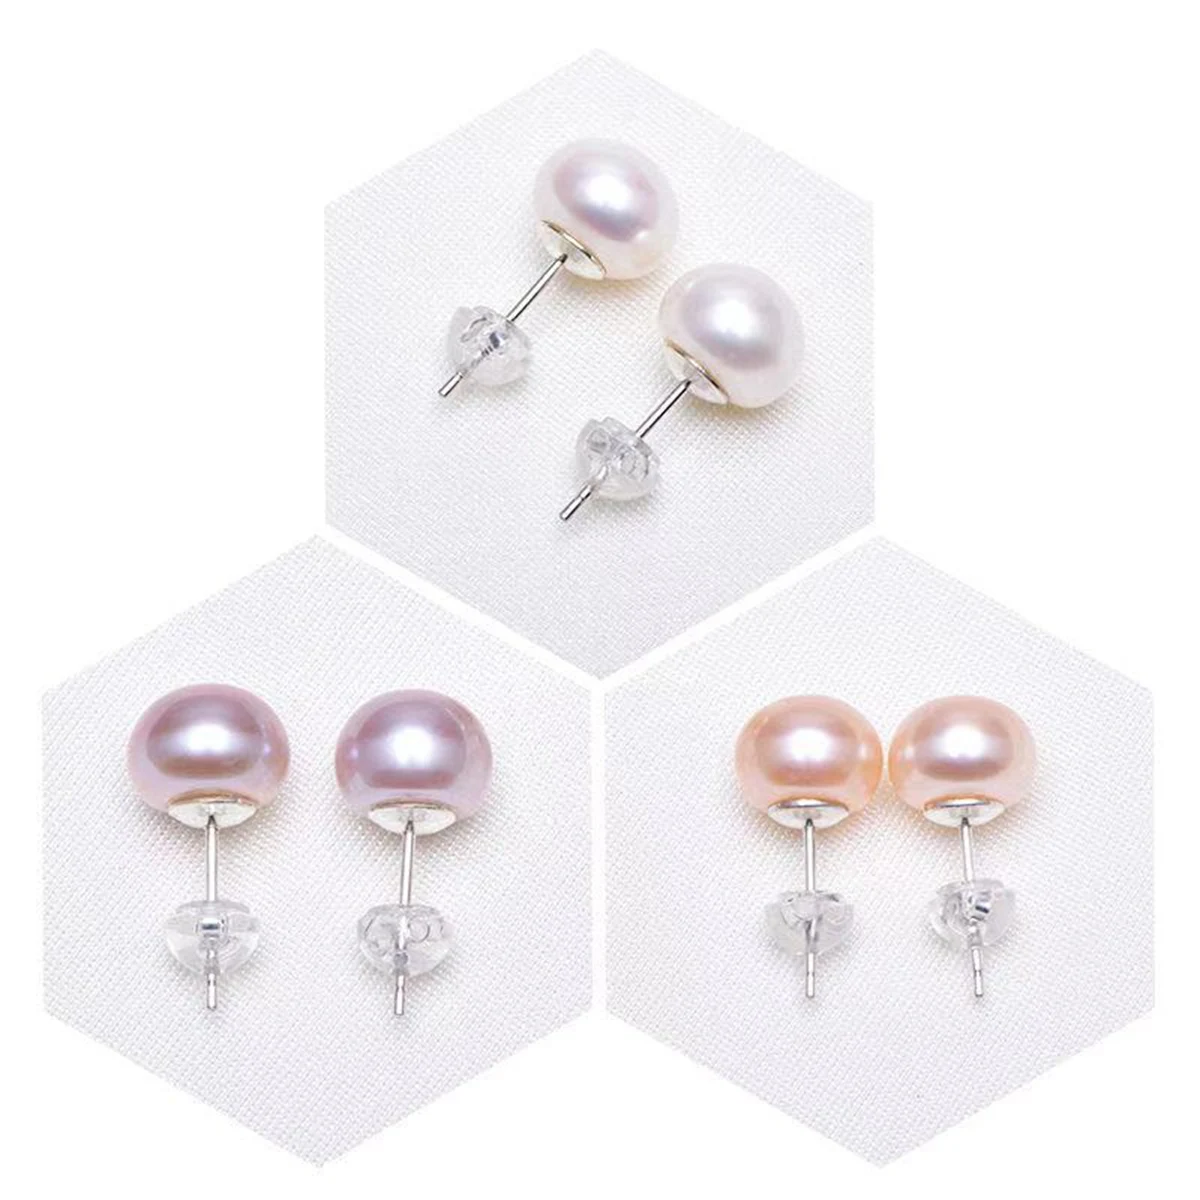 

3 Pairs Women Pearl Earrings Stud 925 Sterling Silver Needle Real Freshwater Pearls Ear Studs Girl Color Size Gift Box